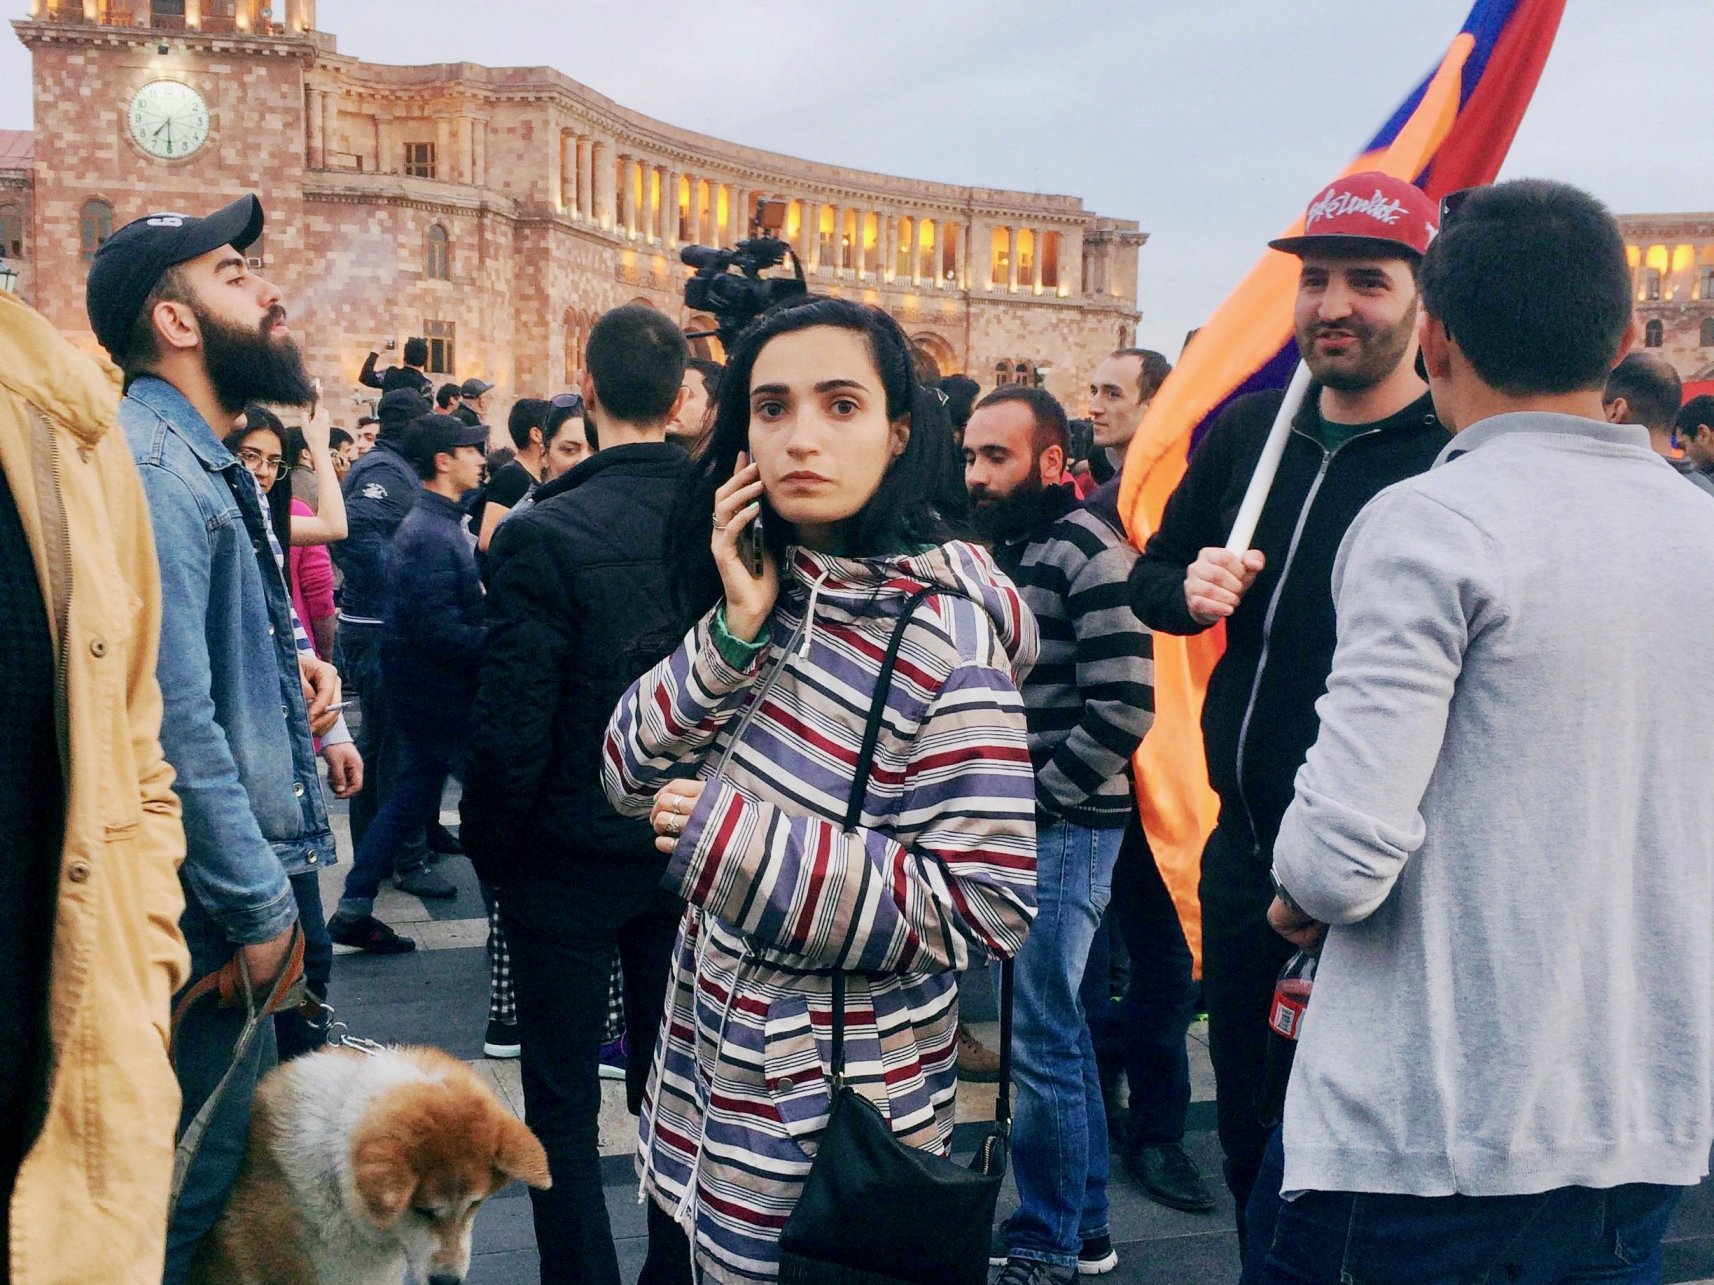 For almost a week now, huge rallies have shaken the Armenian capital of Yerevan, where Nikol Pashinyan, one of the leaders of the movement, called for a “velvet revolution”. But will the protesters this time successfully press for democratic accountability?